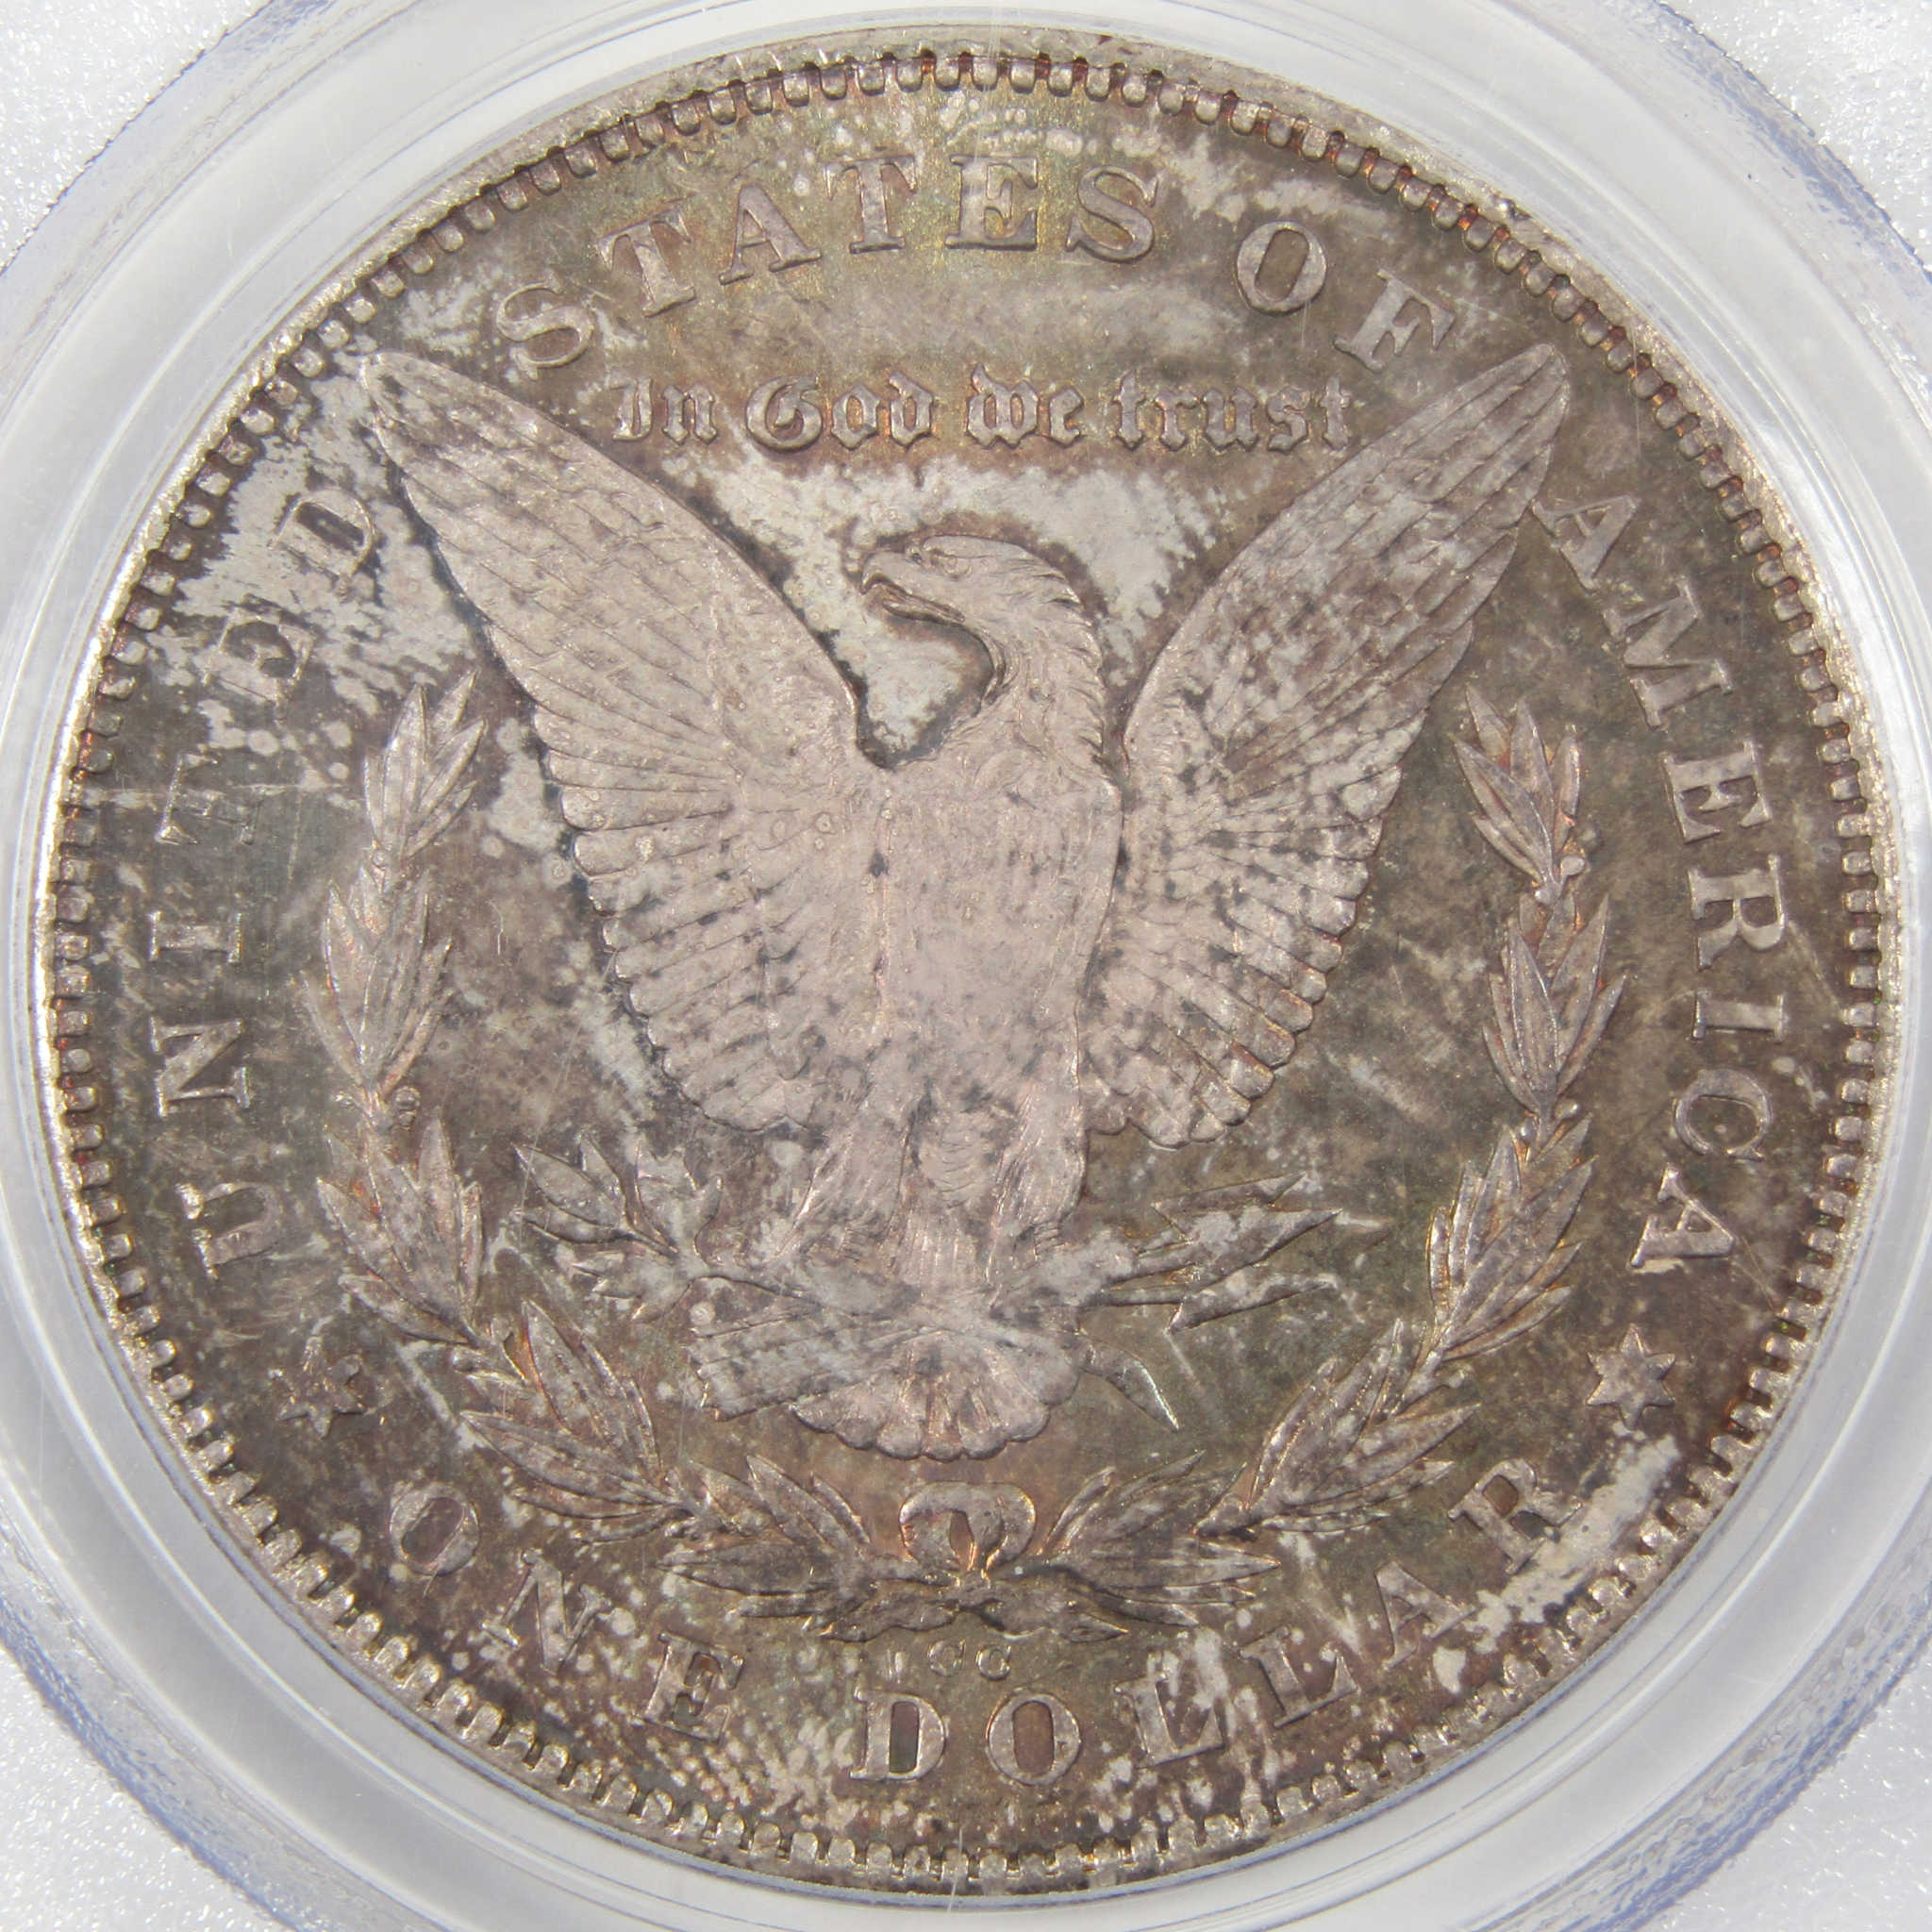 1878 CC Morgan Dollar MS 63 PCGS Silver $1 Uncirculated Coin SKU:I9025 - Morgan coin - Morgan silver dollar - Morgan silver dollar for sale - Profile Coins &amp; Collectibles